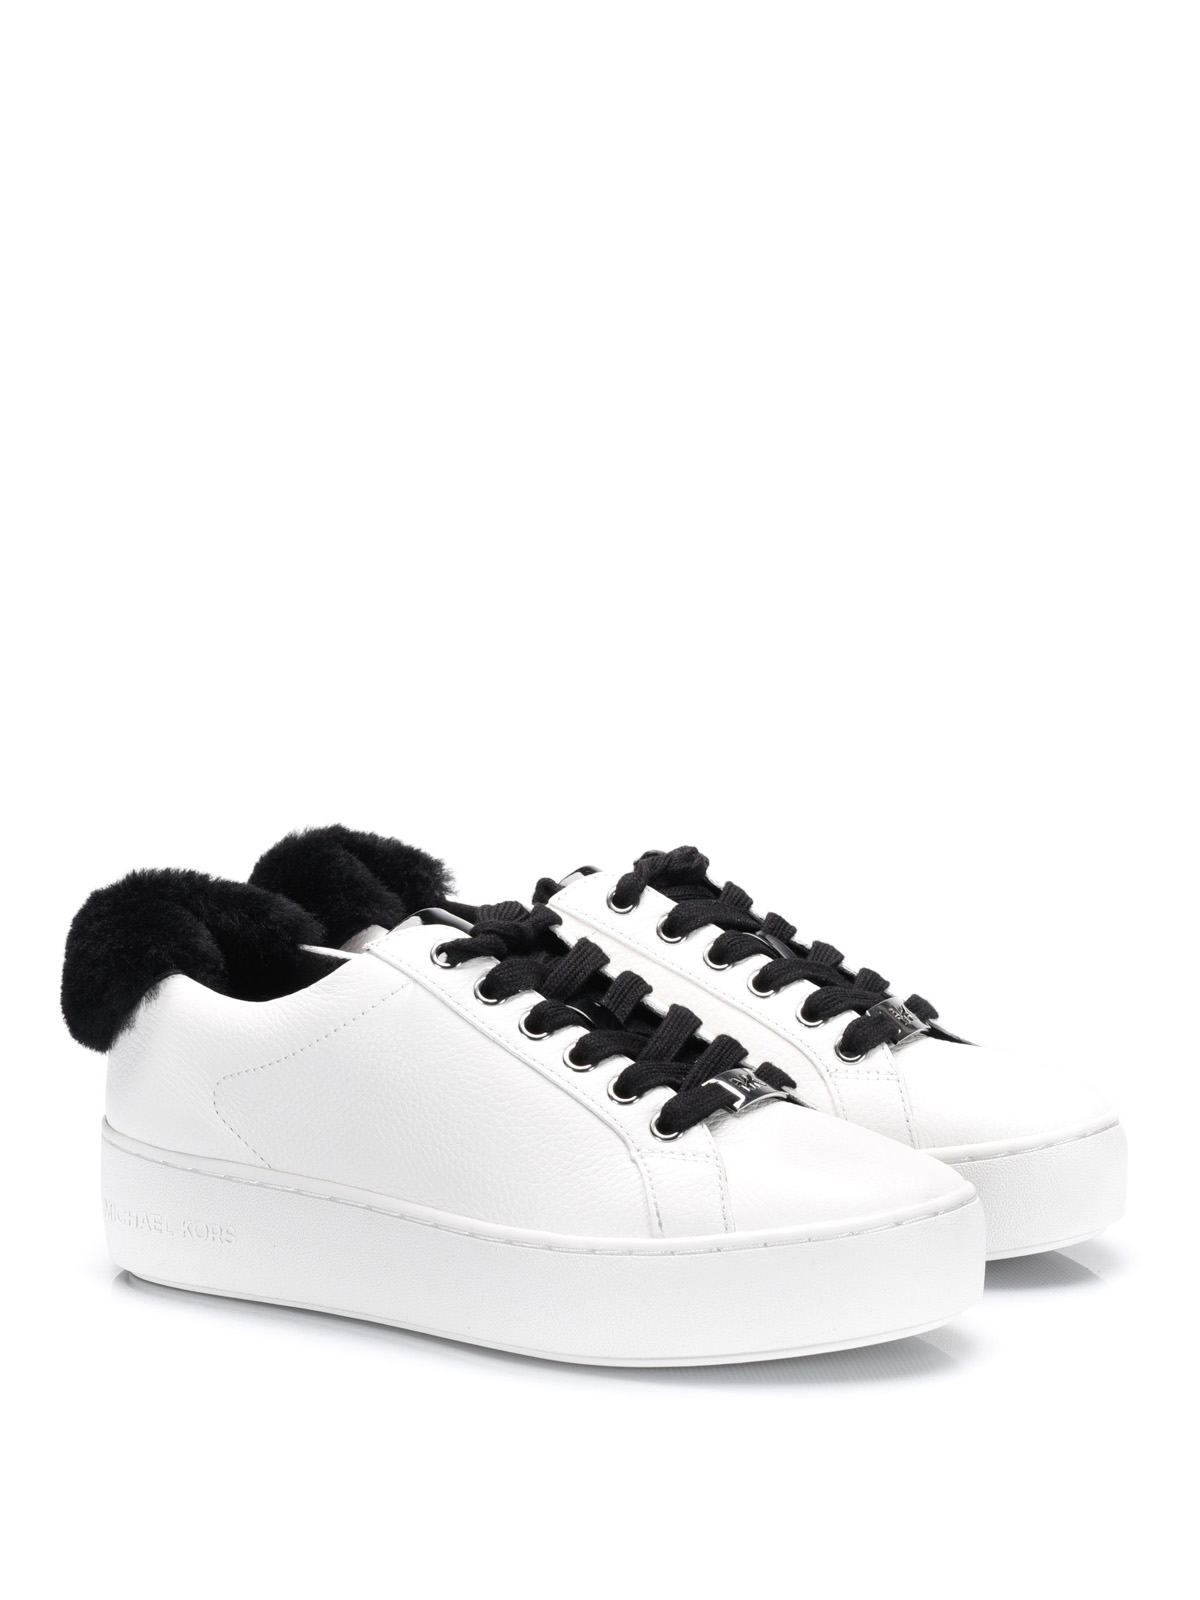 MICHAEL KORS sneakers for woman  Gnawed Blue  Michael Kors sneakers  43T2OLFS1B online on GIGLIOCOM